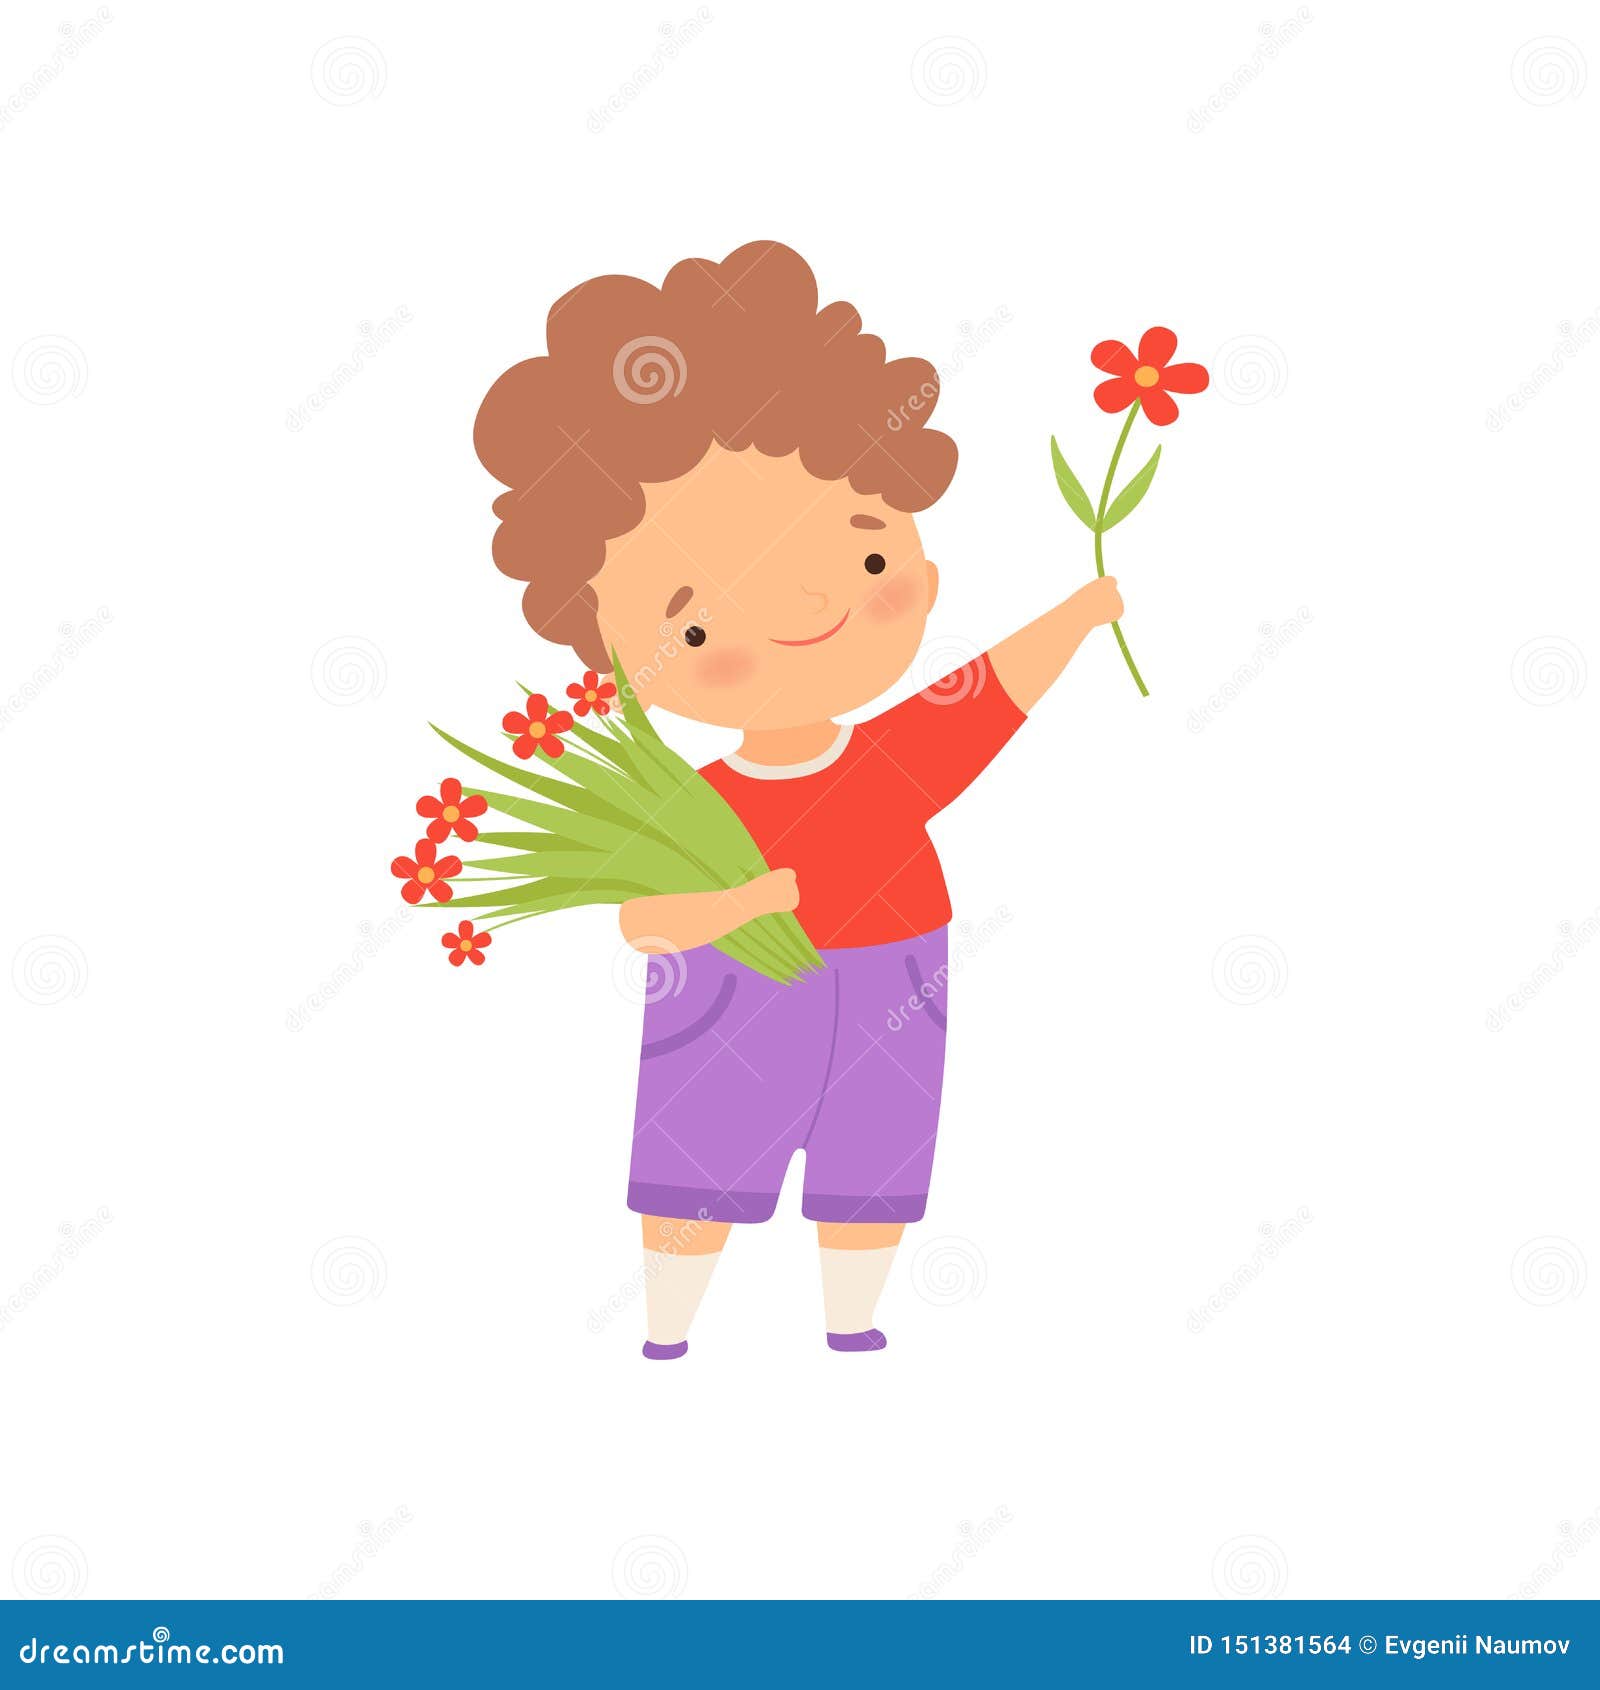 Cute Happy Little Boy with Bouquet of Flowers Cartoon Vector Illustration  Stock Vector - Illustration of flower, little: 151381564